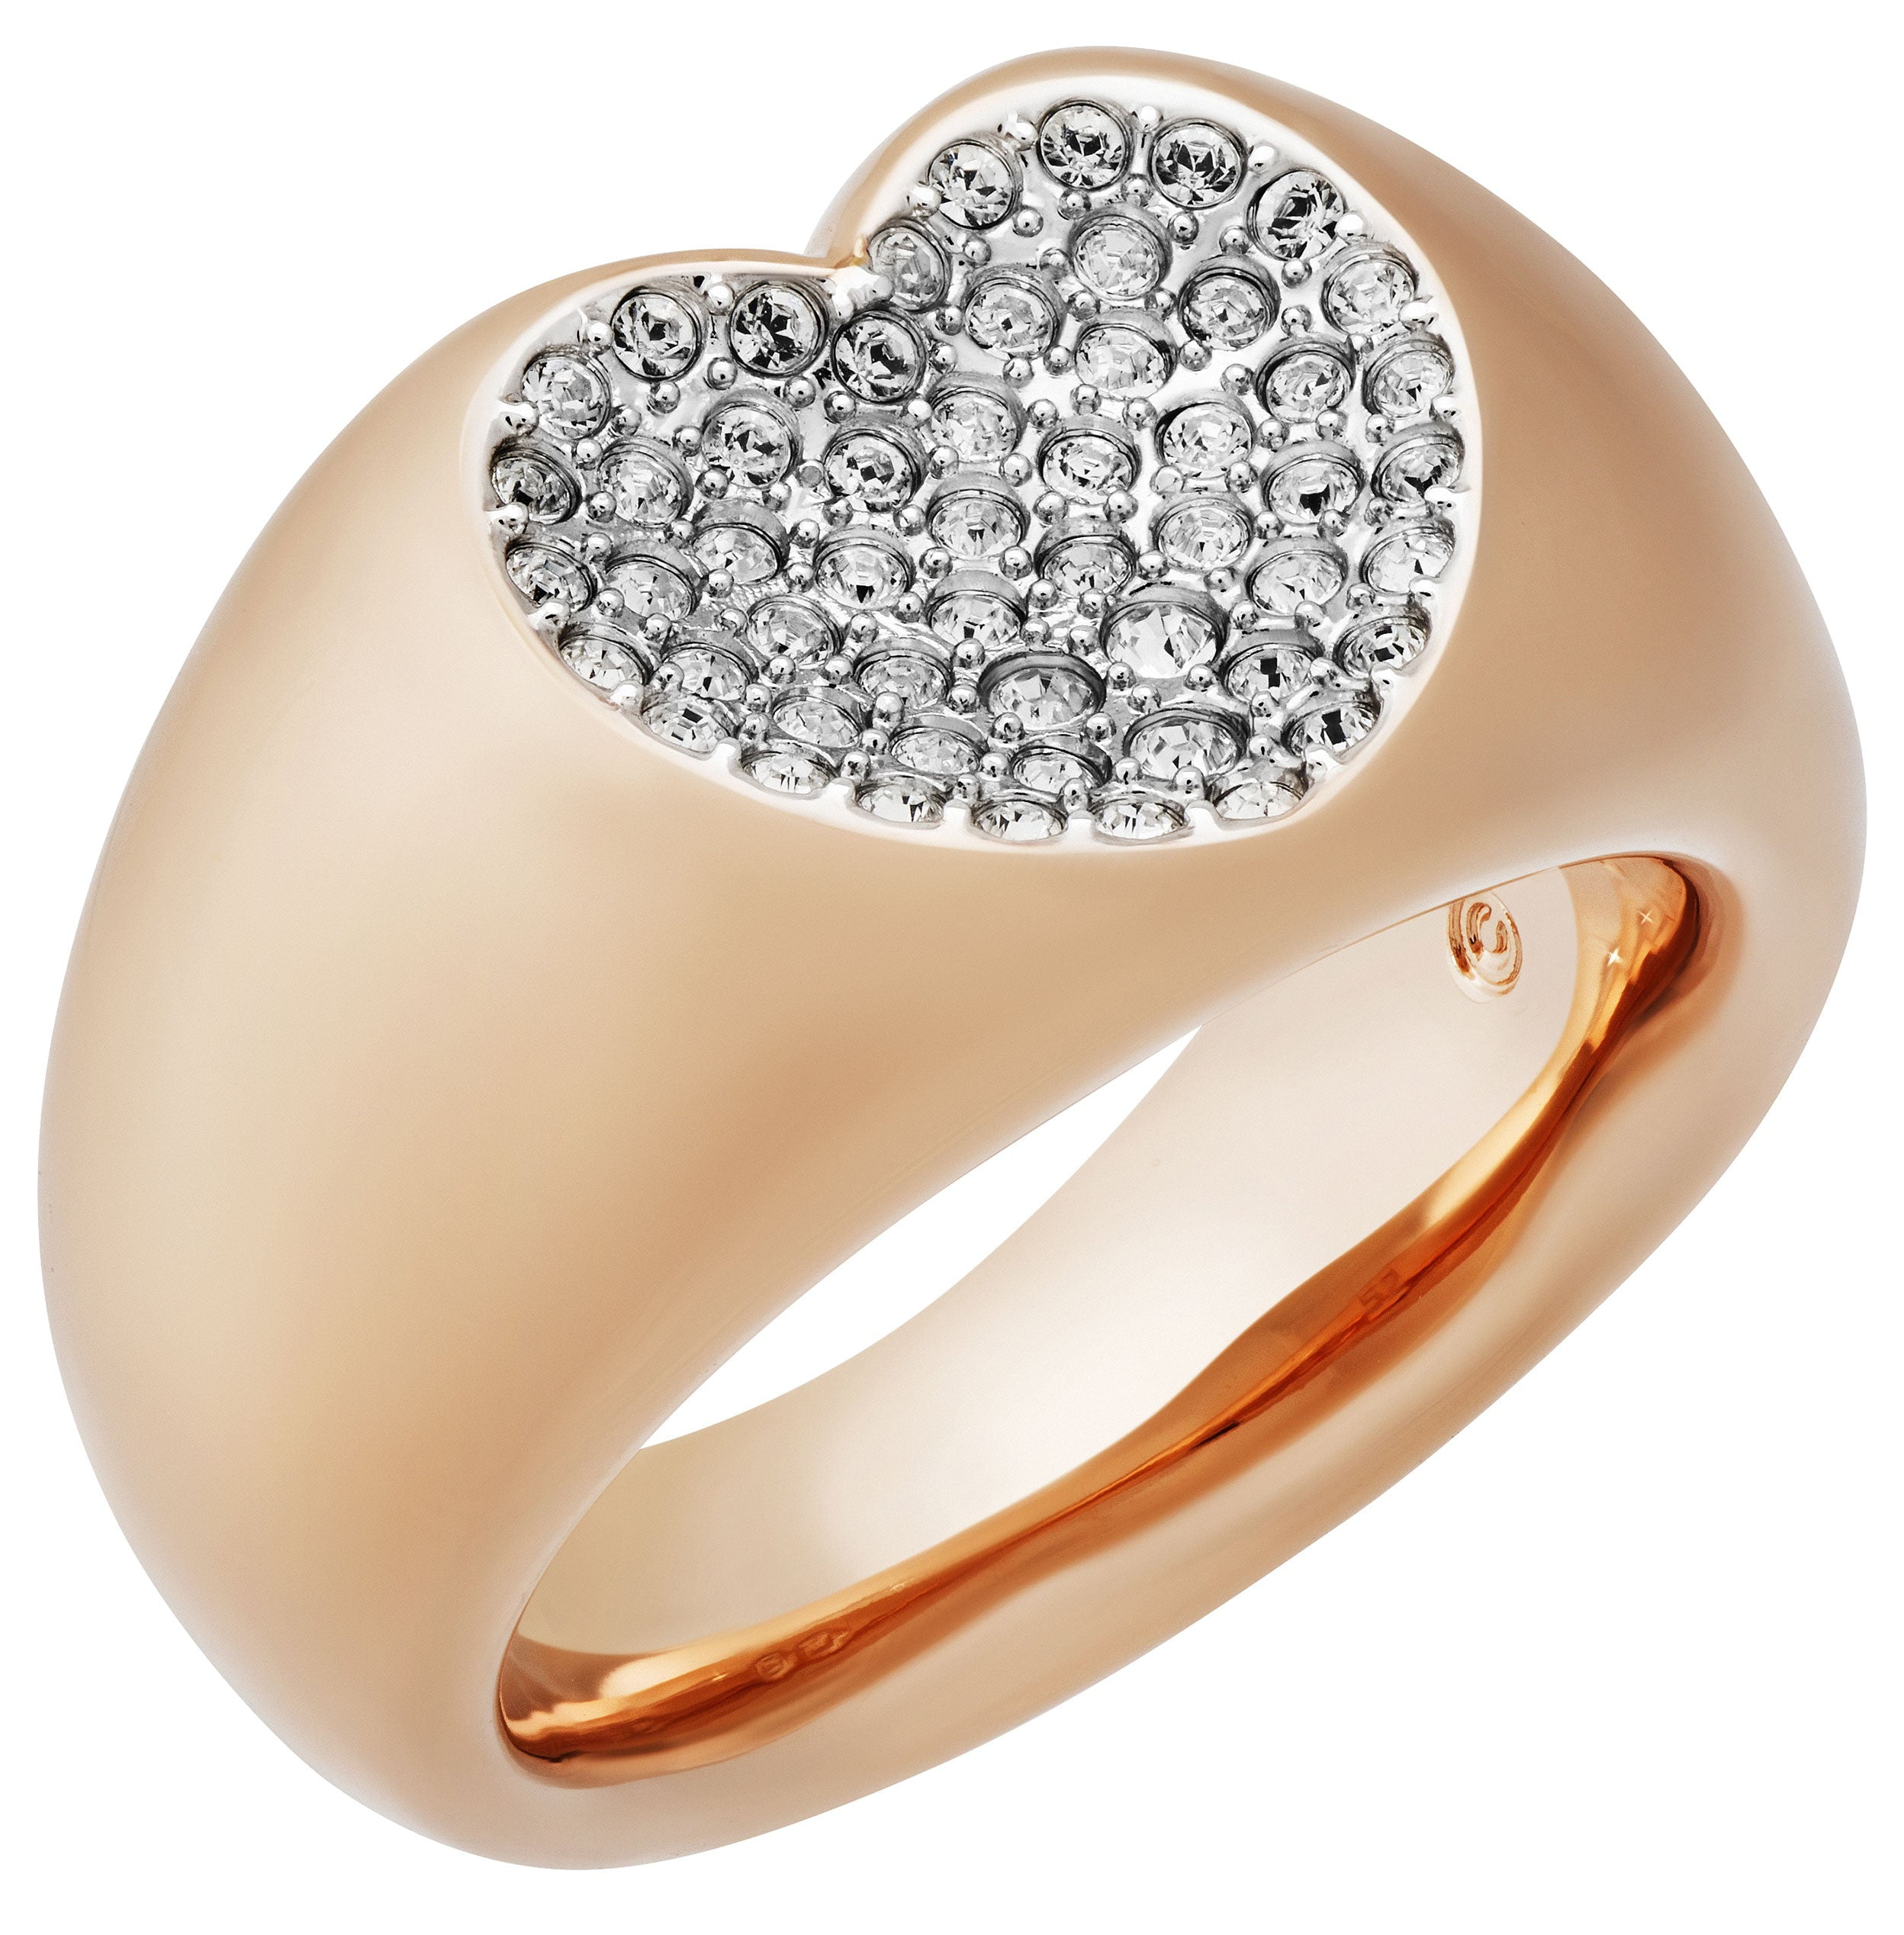 Crystal Heart Ring - Rose Gold